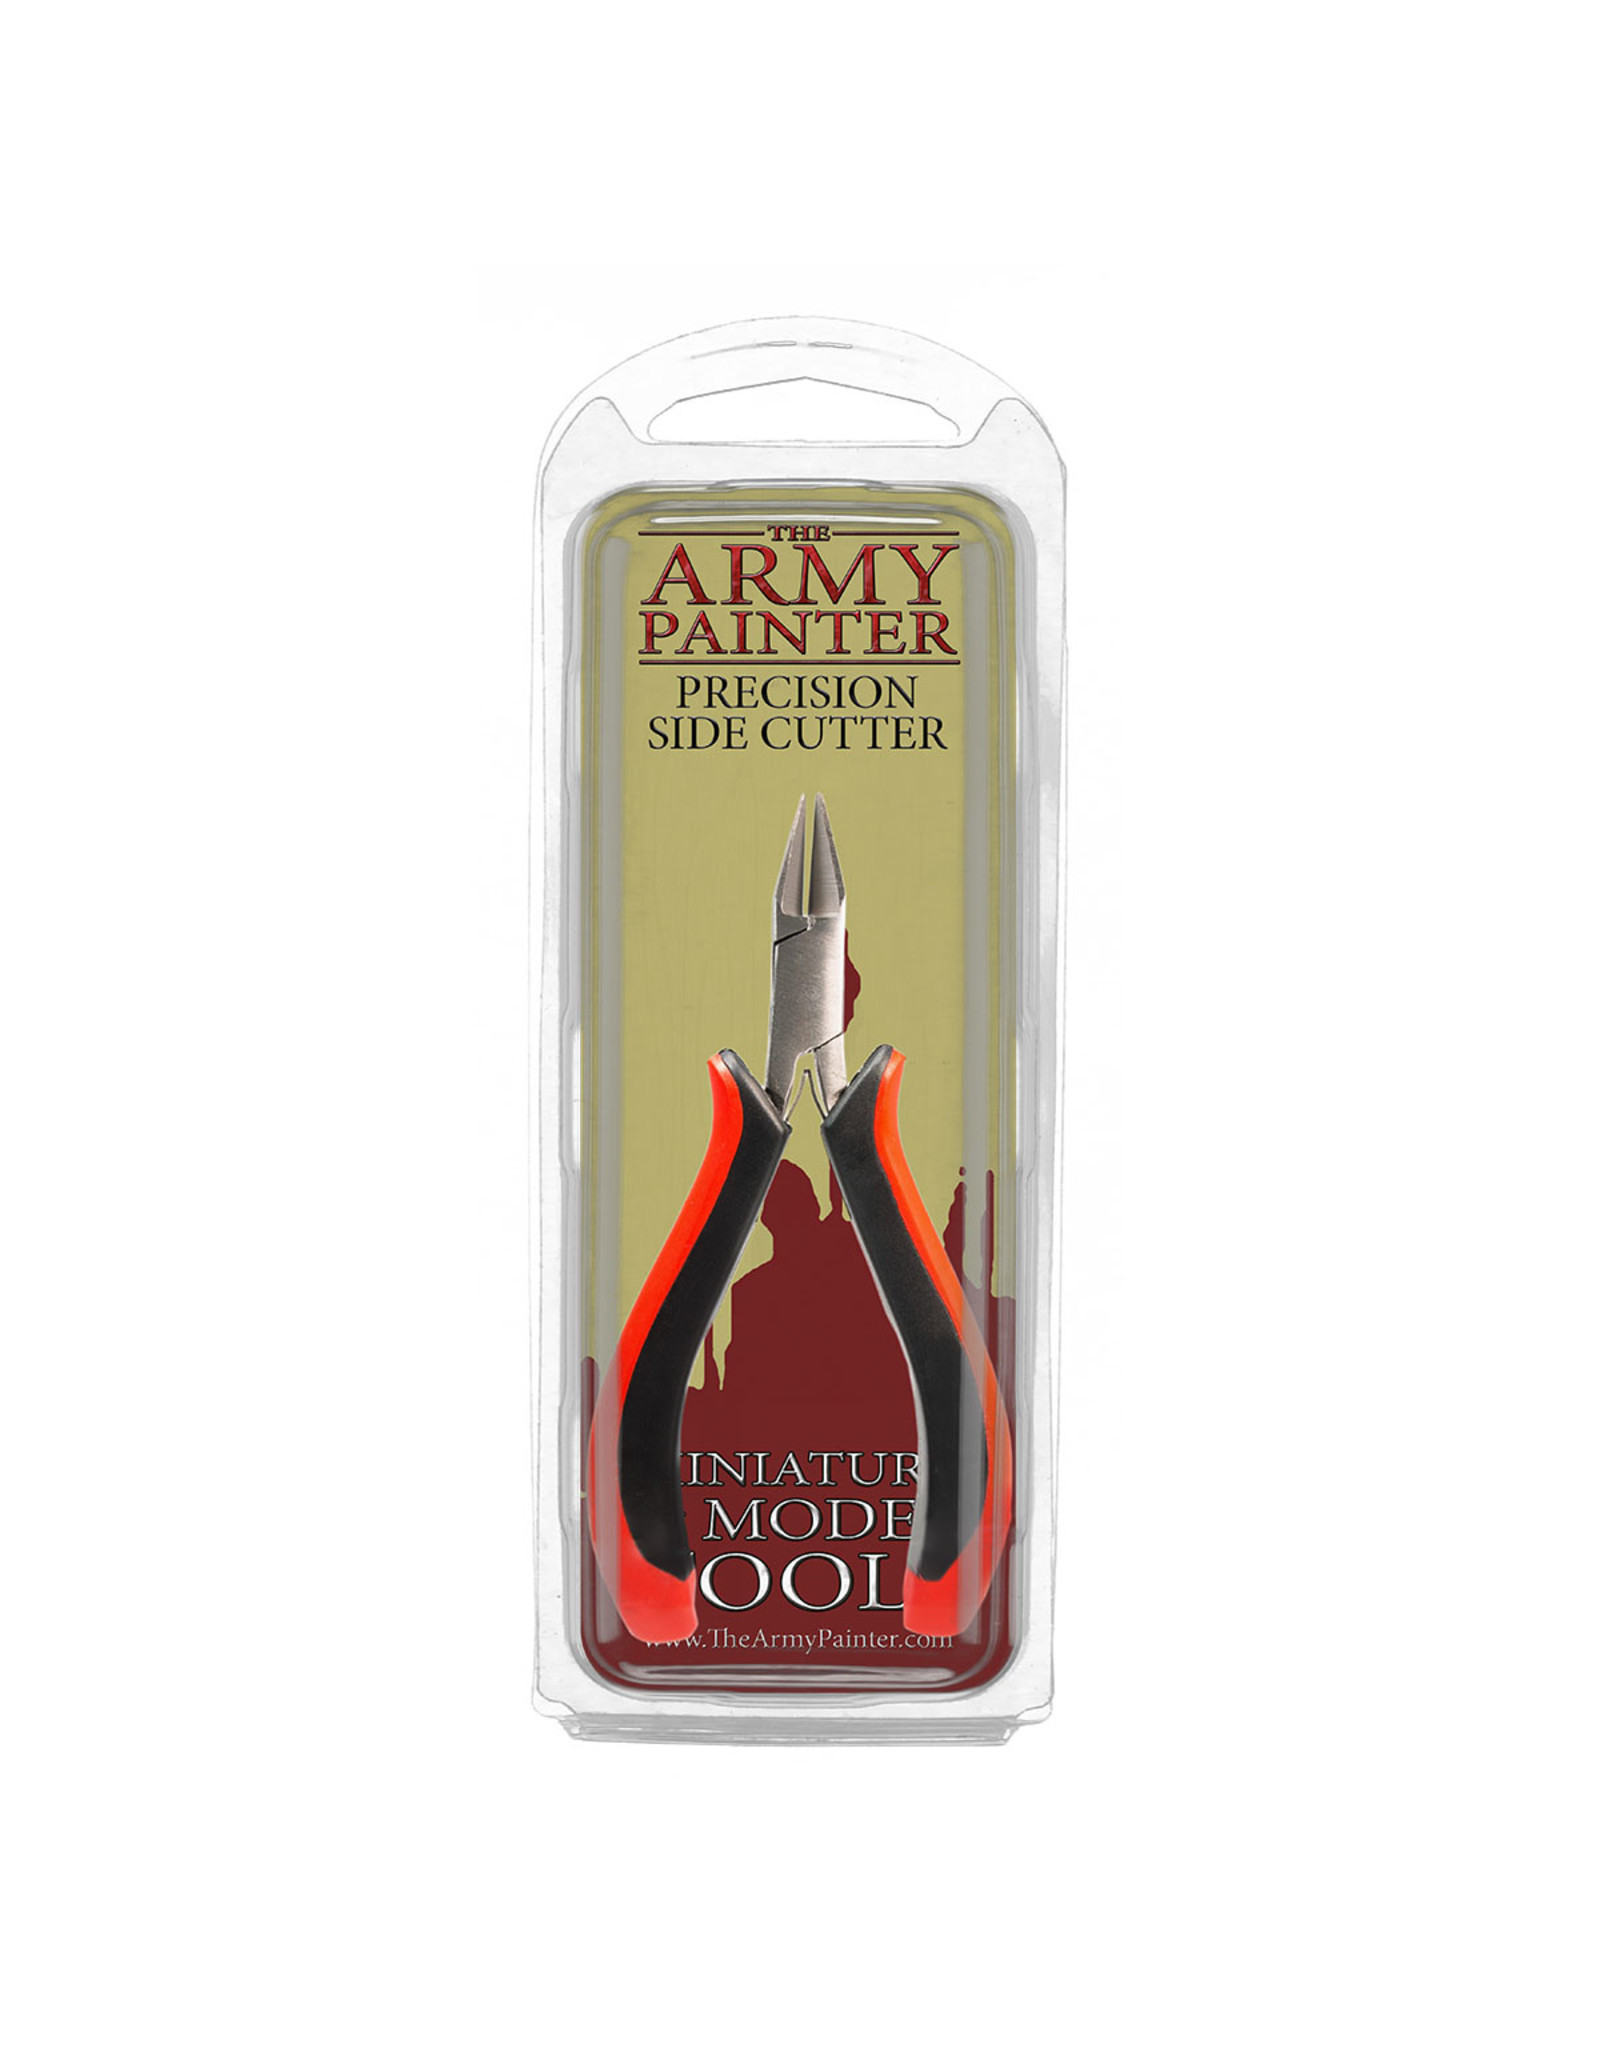 The Army Painter The Army Painter Precision Side Cutter